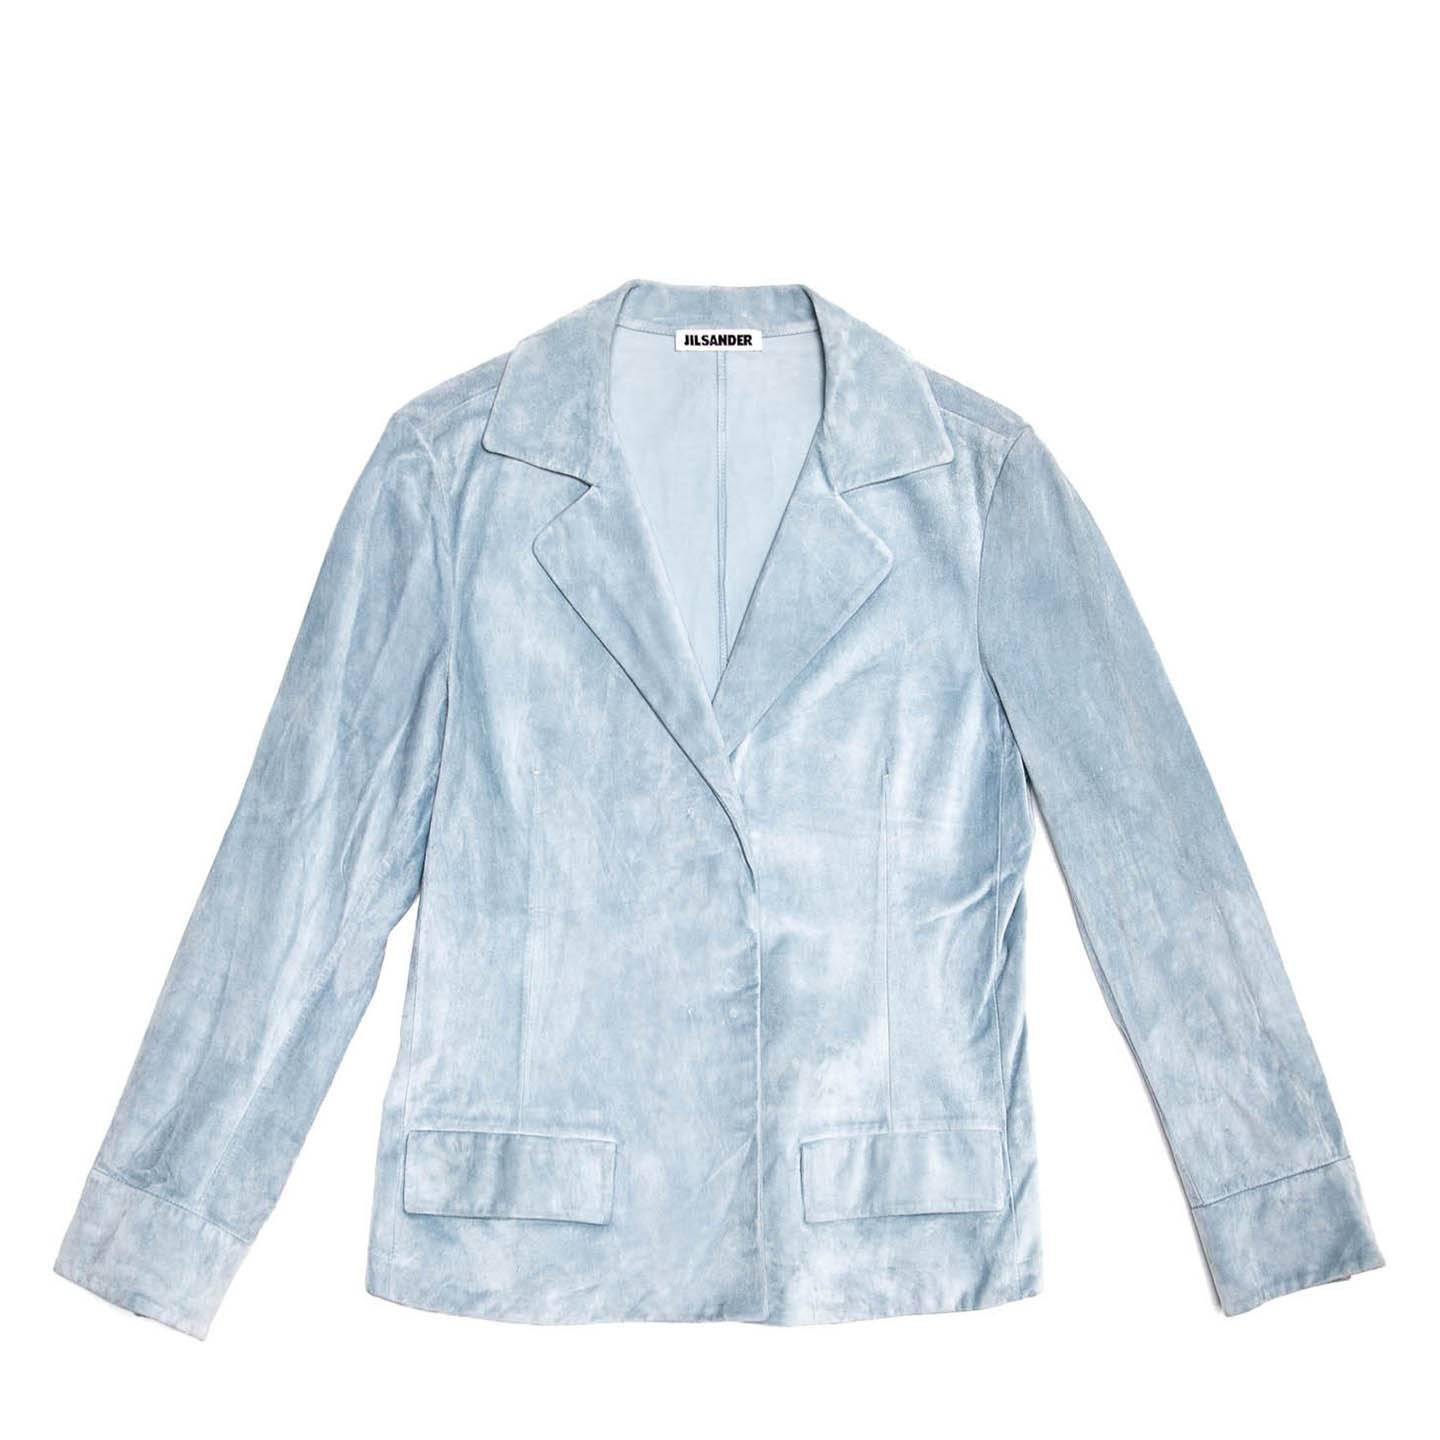 Powder blue velvet soft suede cropped jacket with medium size lapel, flap pockets and two hidden snap buttons fastening the front. The back is plain and the cuffs are enriched by a shirt style band and they fasten with invisible snap buttons to